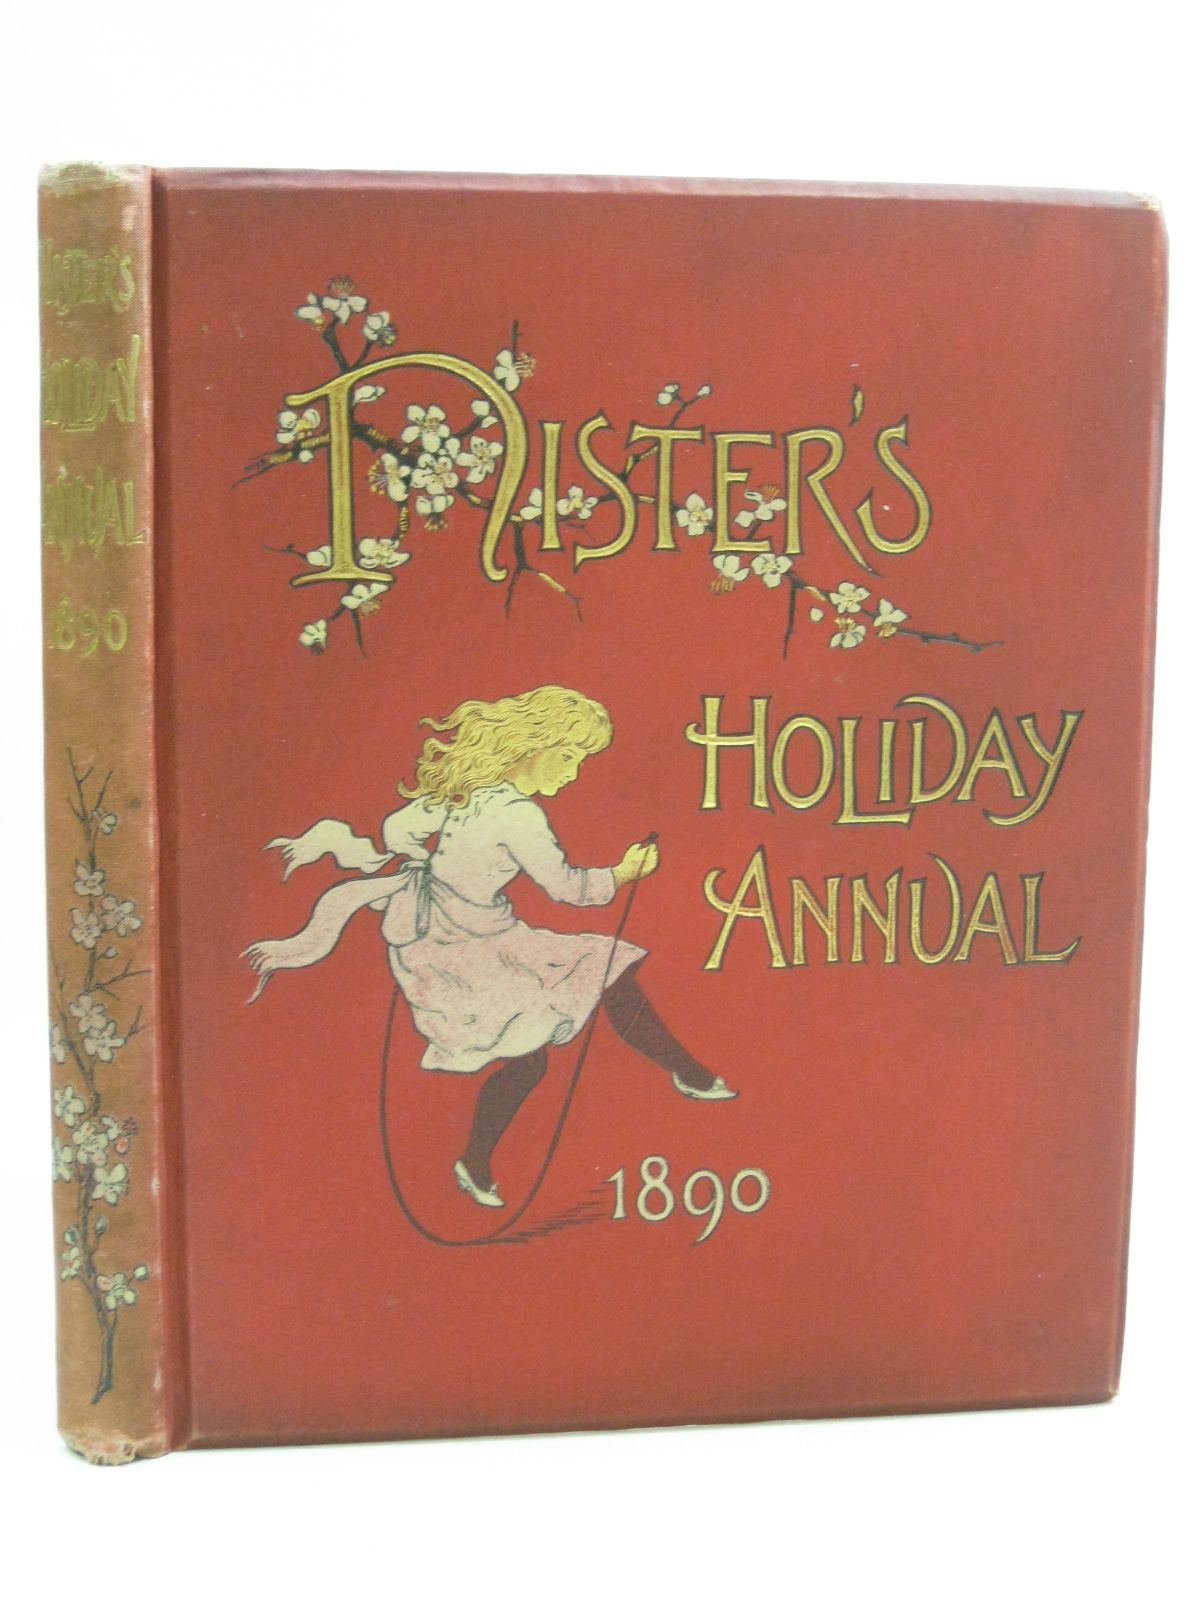 Photo of NISTER'S HOLIDAY ANNUAL 1890 written by Mack, Robert Ellice Haskell, L. et al, illustrated by Wain, Louis Scannell, Edith et al., published by Ernest Nister (STOCK CODE: 1404721)  for sale by Stella & Rose's Books